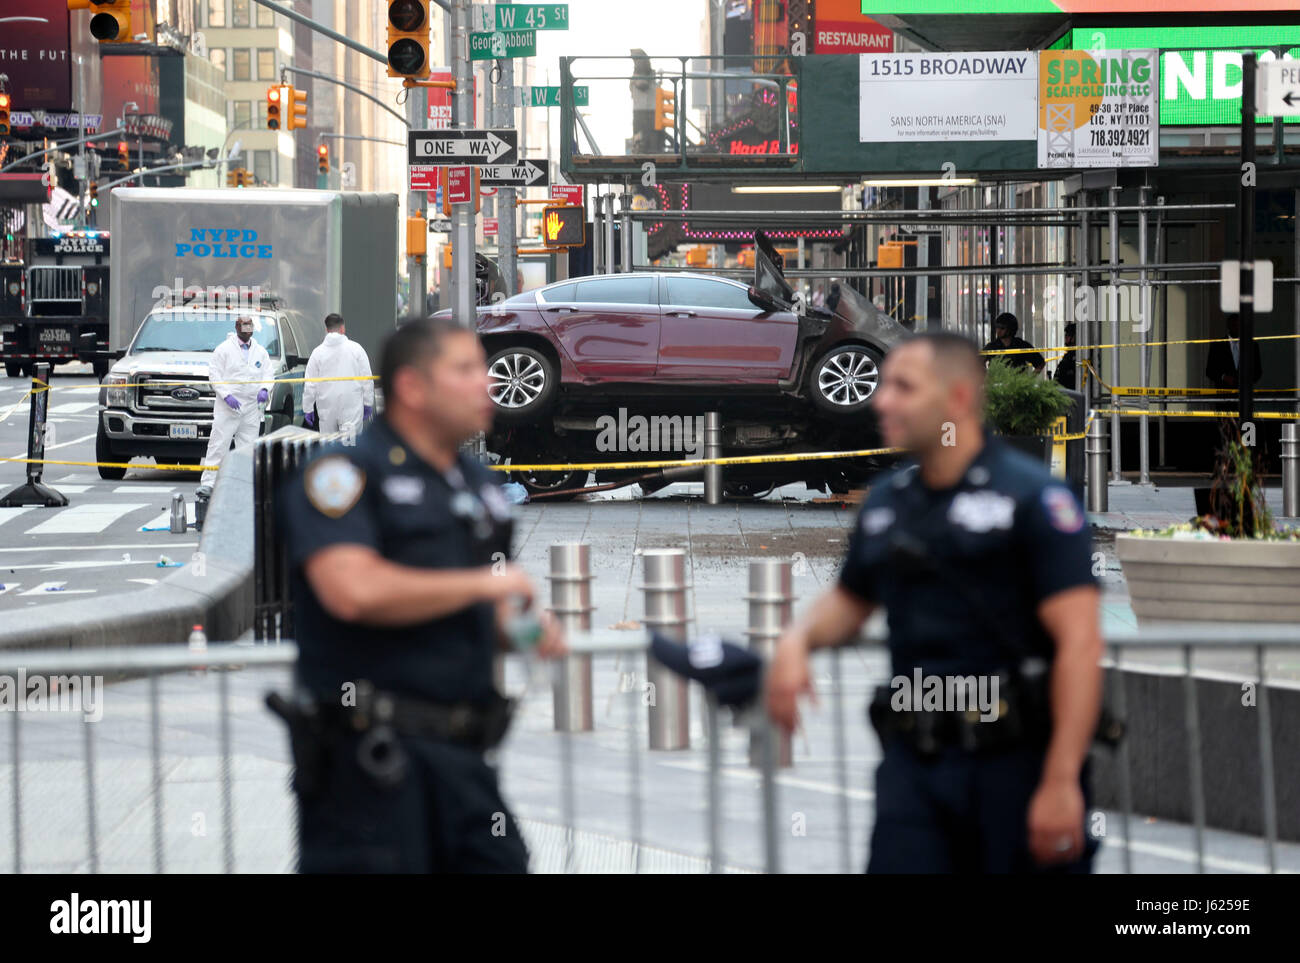 New York, USA. 18th May, 2017. Investigators work on the scene of a car crash incident at Times Square in New York City, the United States, on May 18, 2017. The man who drove a car into a crowd in Times Square on Thursday was in custody, in which one was killed and 22 others injured, New York's mayor said. Credit: Wang Ying/Xinhua/Alamy Live News Stock Photo